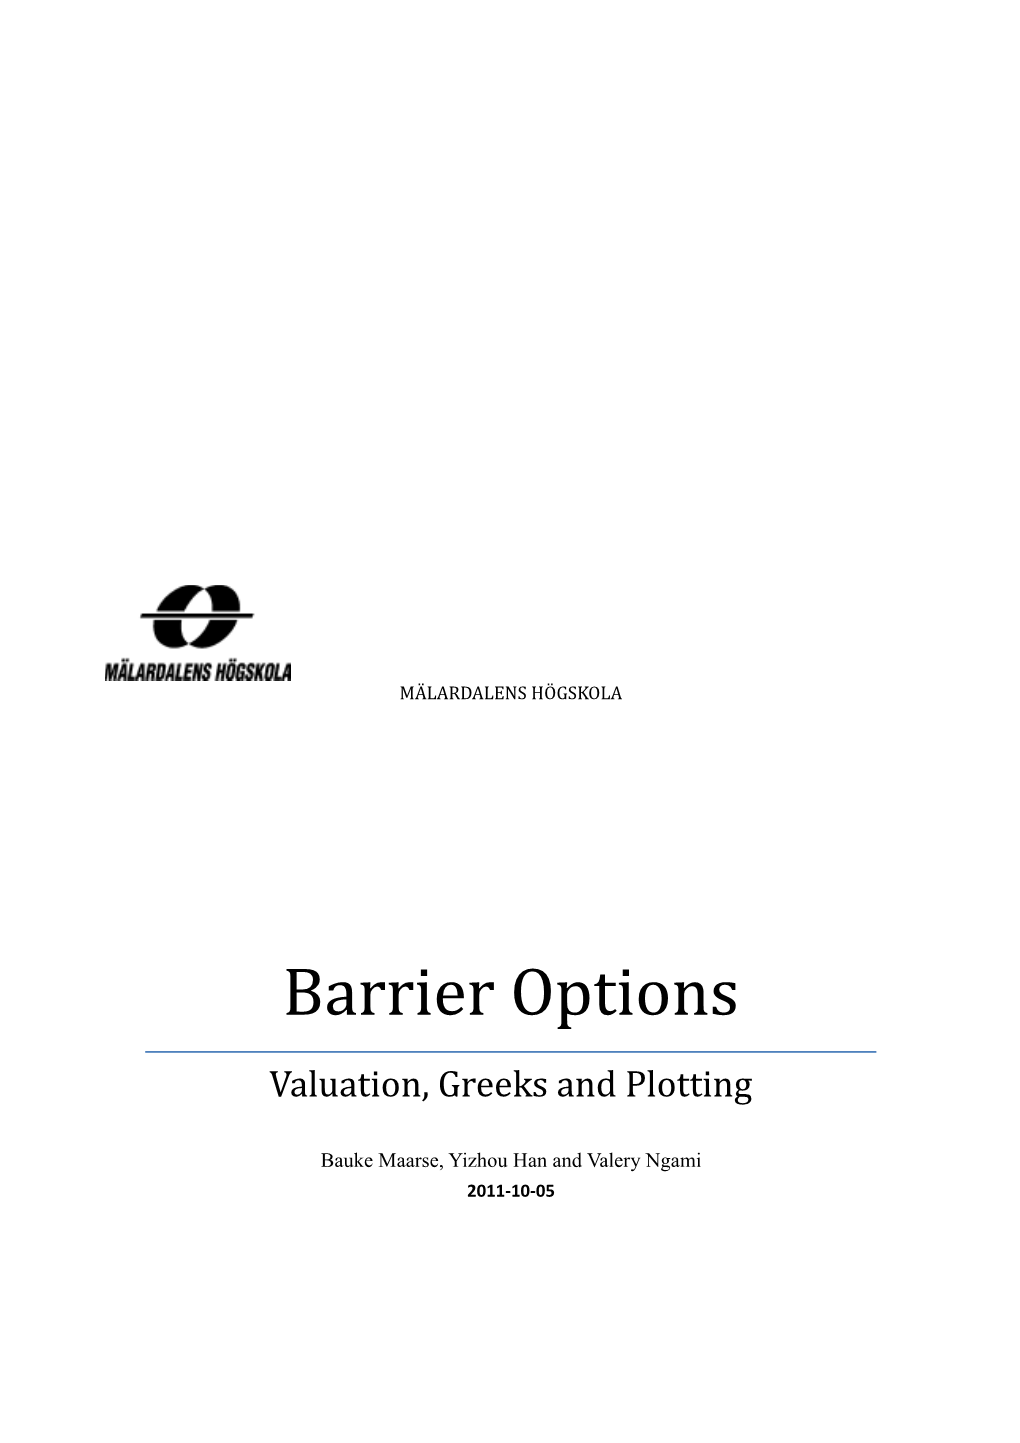 How to Calculate Barrier Options with Zero Debates